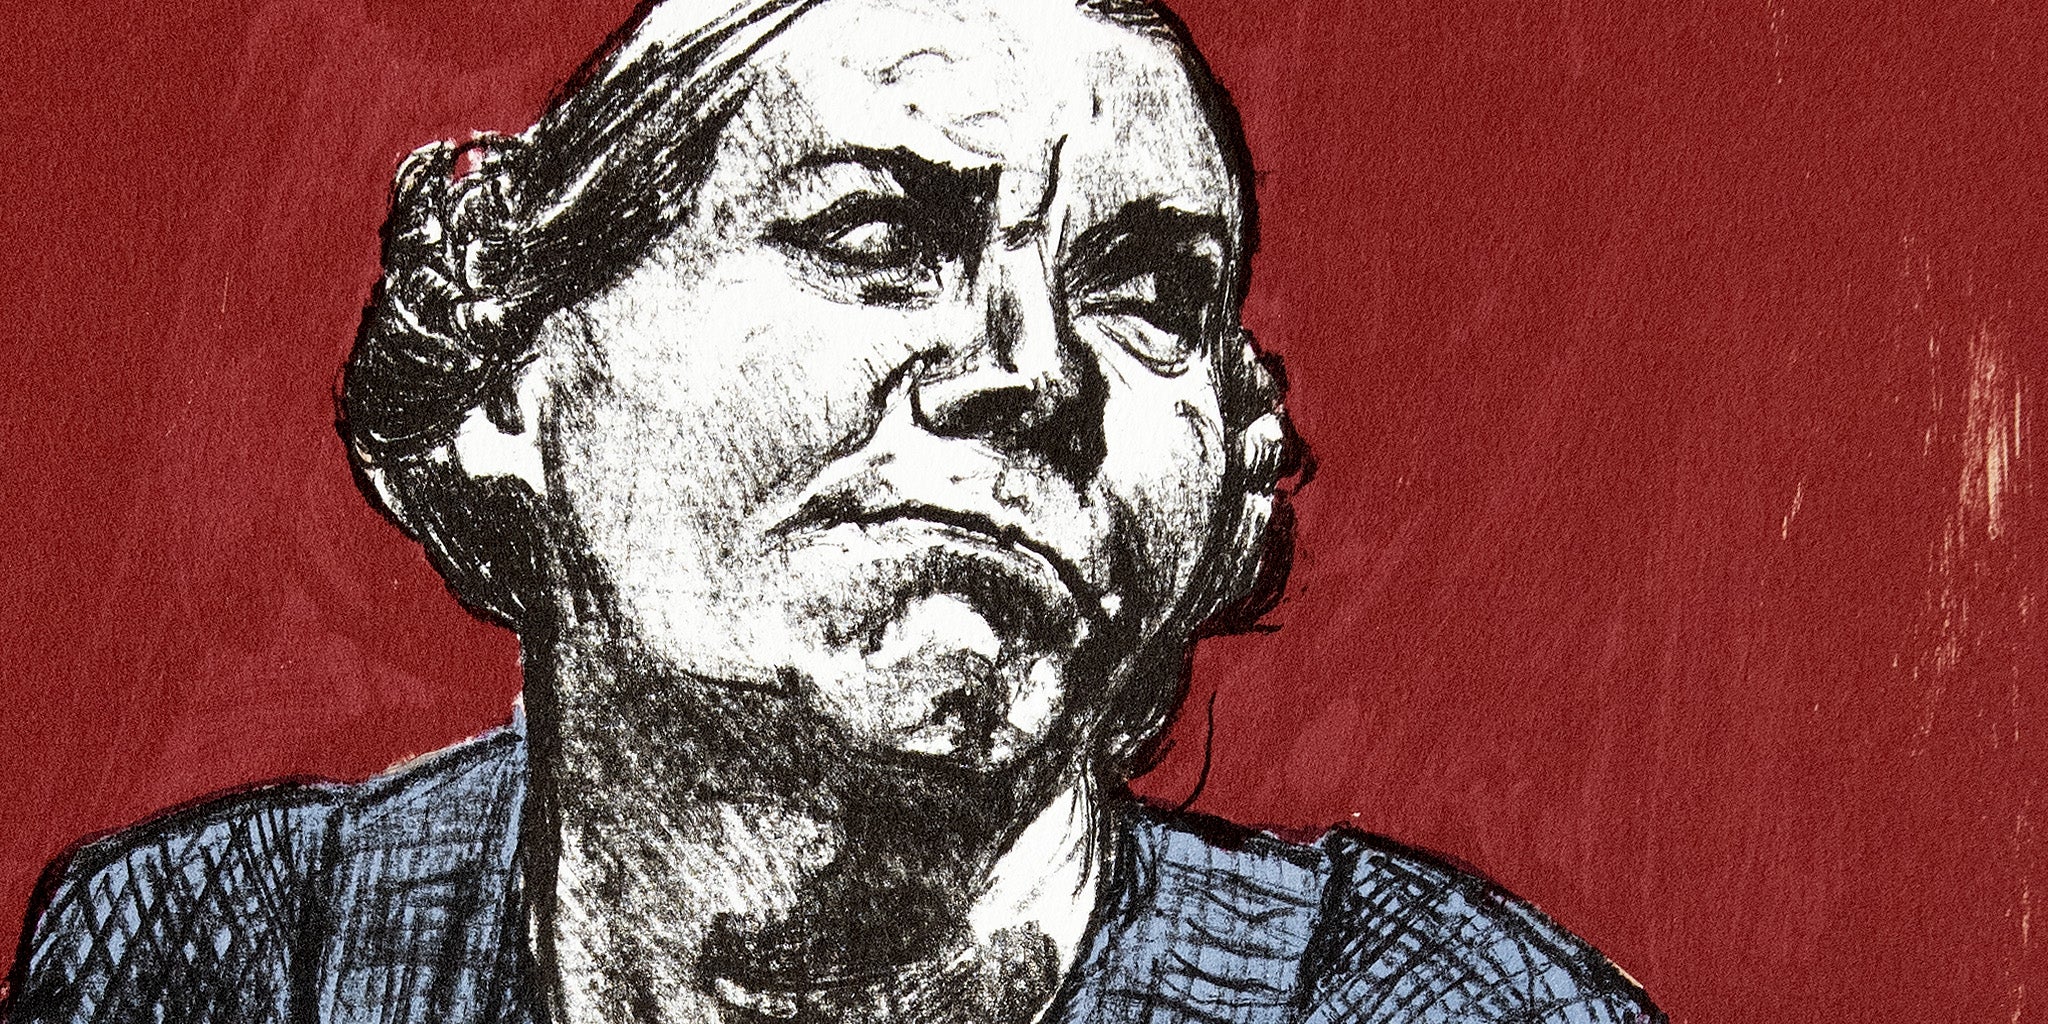 detail from Come To Me, signed original lithograph by Paula Rego from her Jane Eyre suite, 2001-2002 